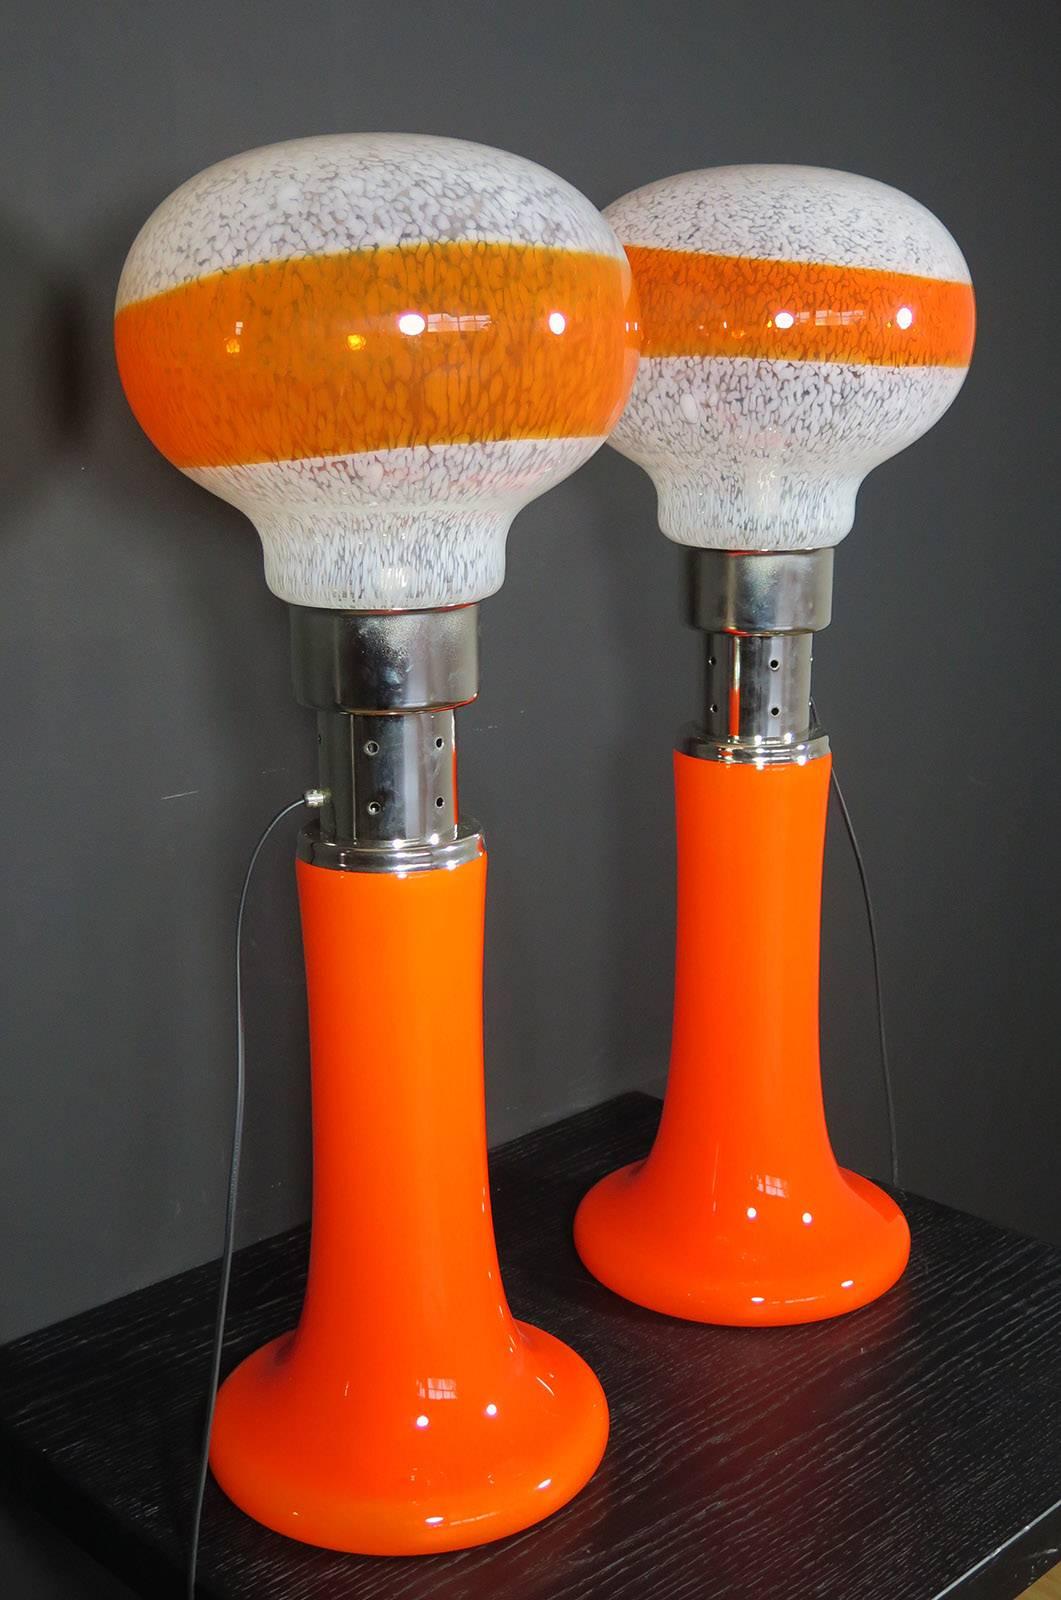 Pair of 1970 Spage Age Murano glass floor lamps by Mazzega, featuring a textured white bubbles on transparent blown glass top with orange band mounted on a orange glass base joined by a chromed steel frame and dual ignitions.
 